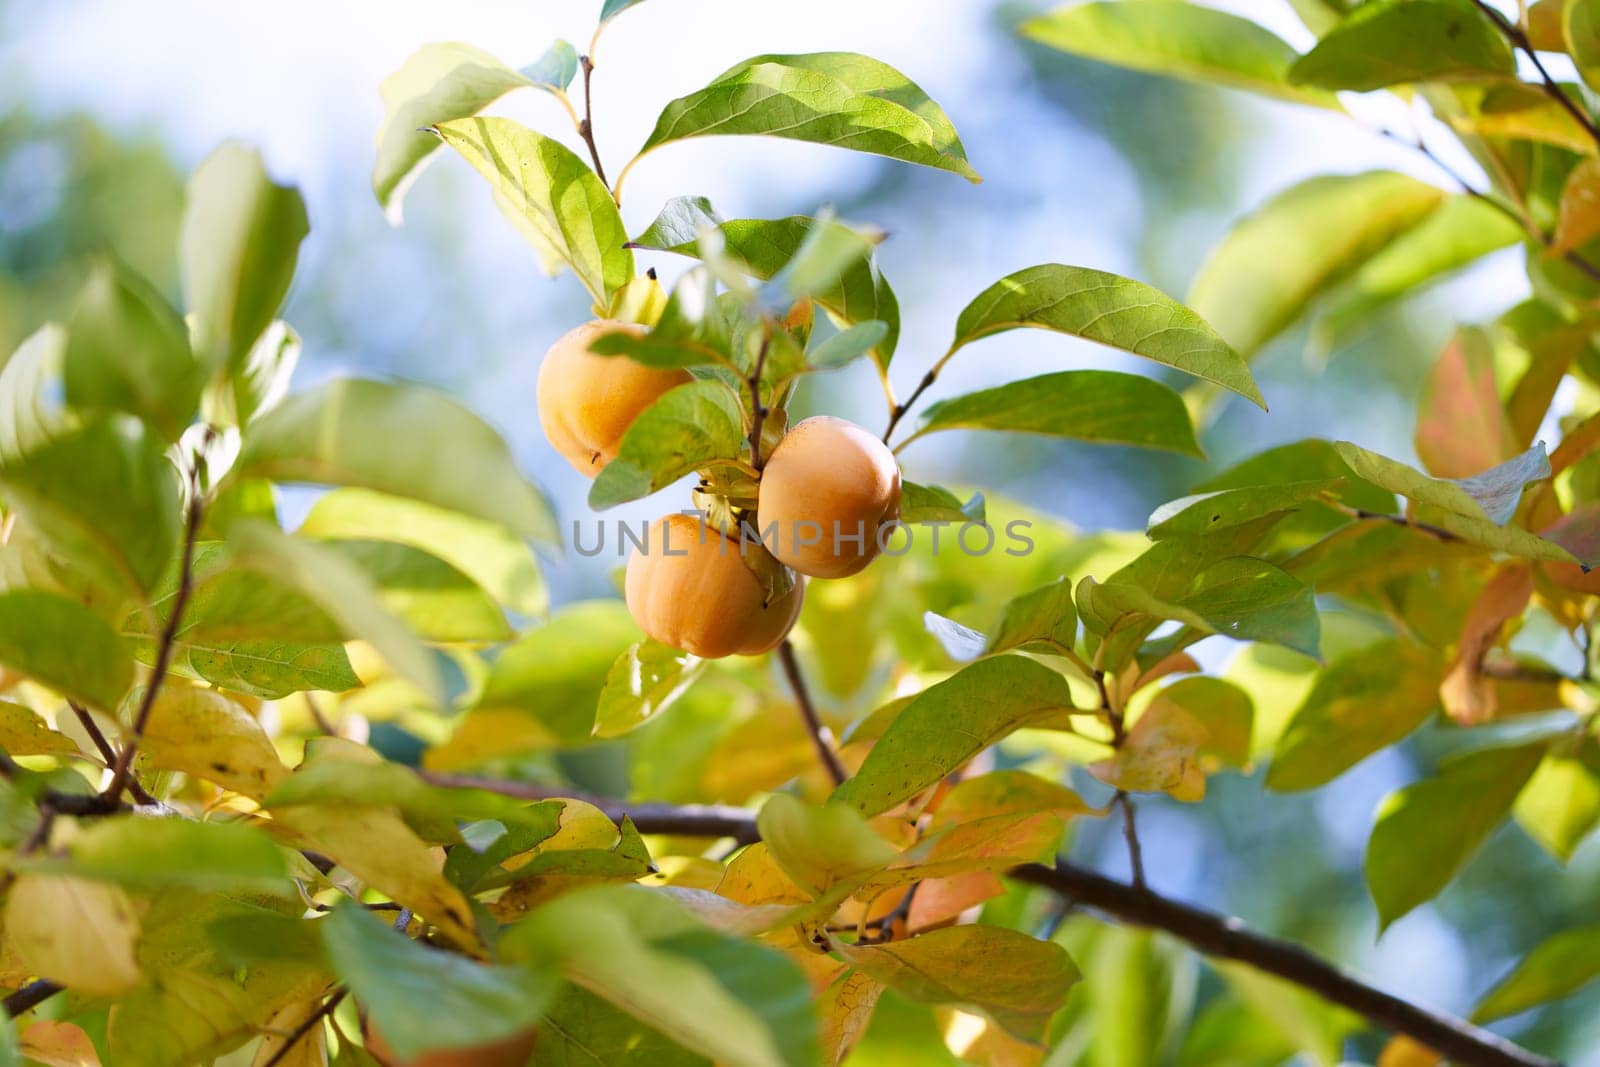 Orange persimmon hanging on green branches in sunlight. High quality photo